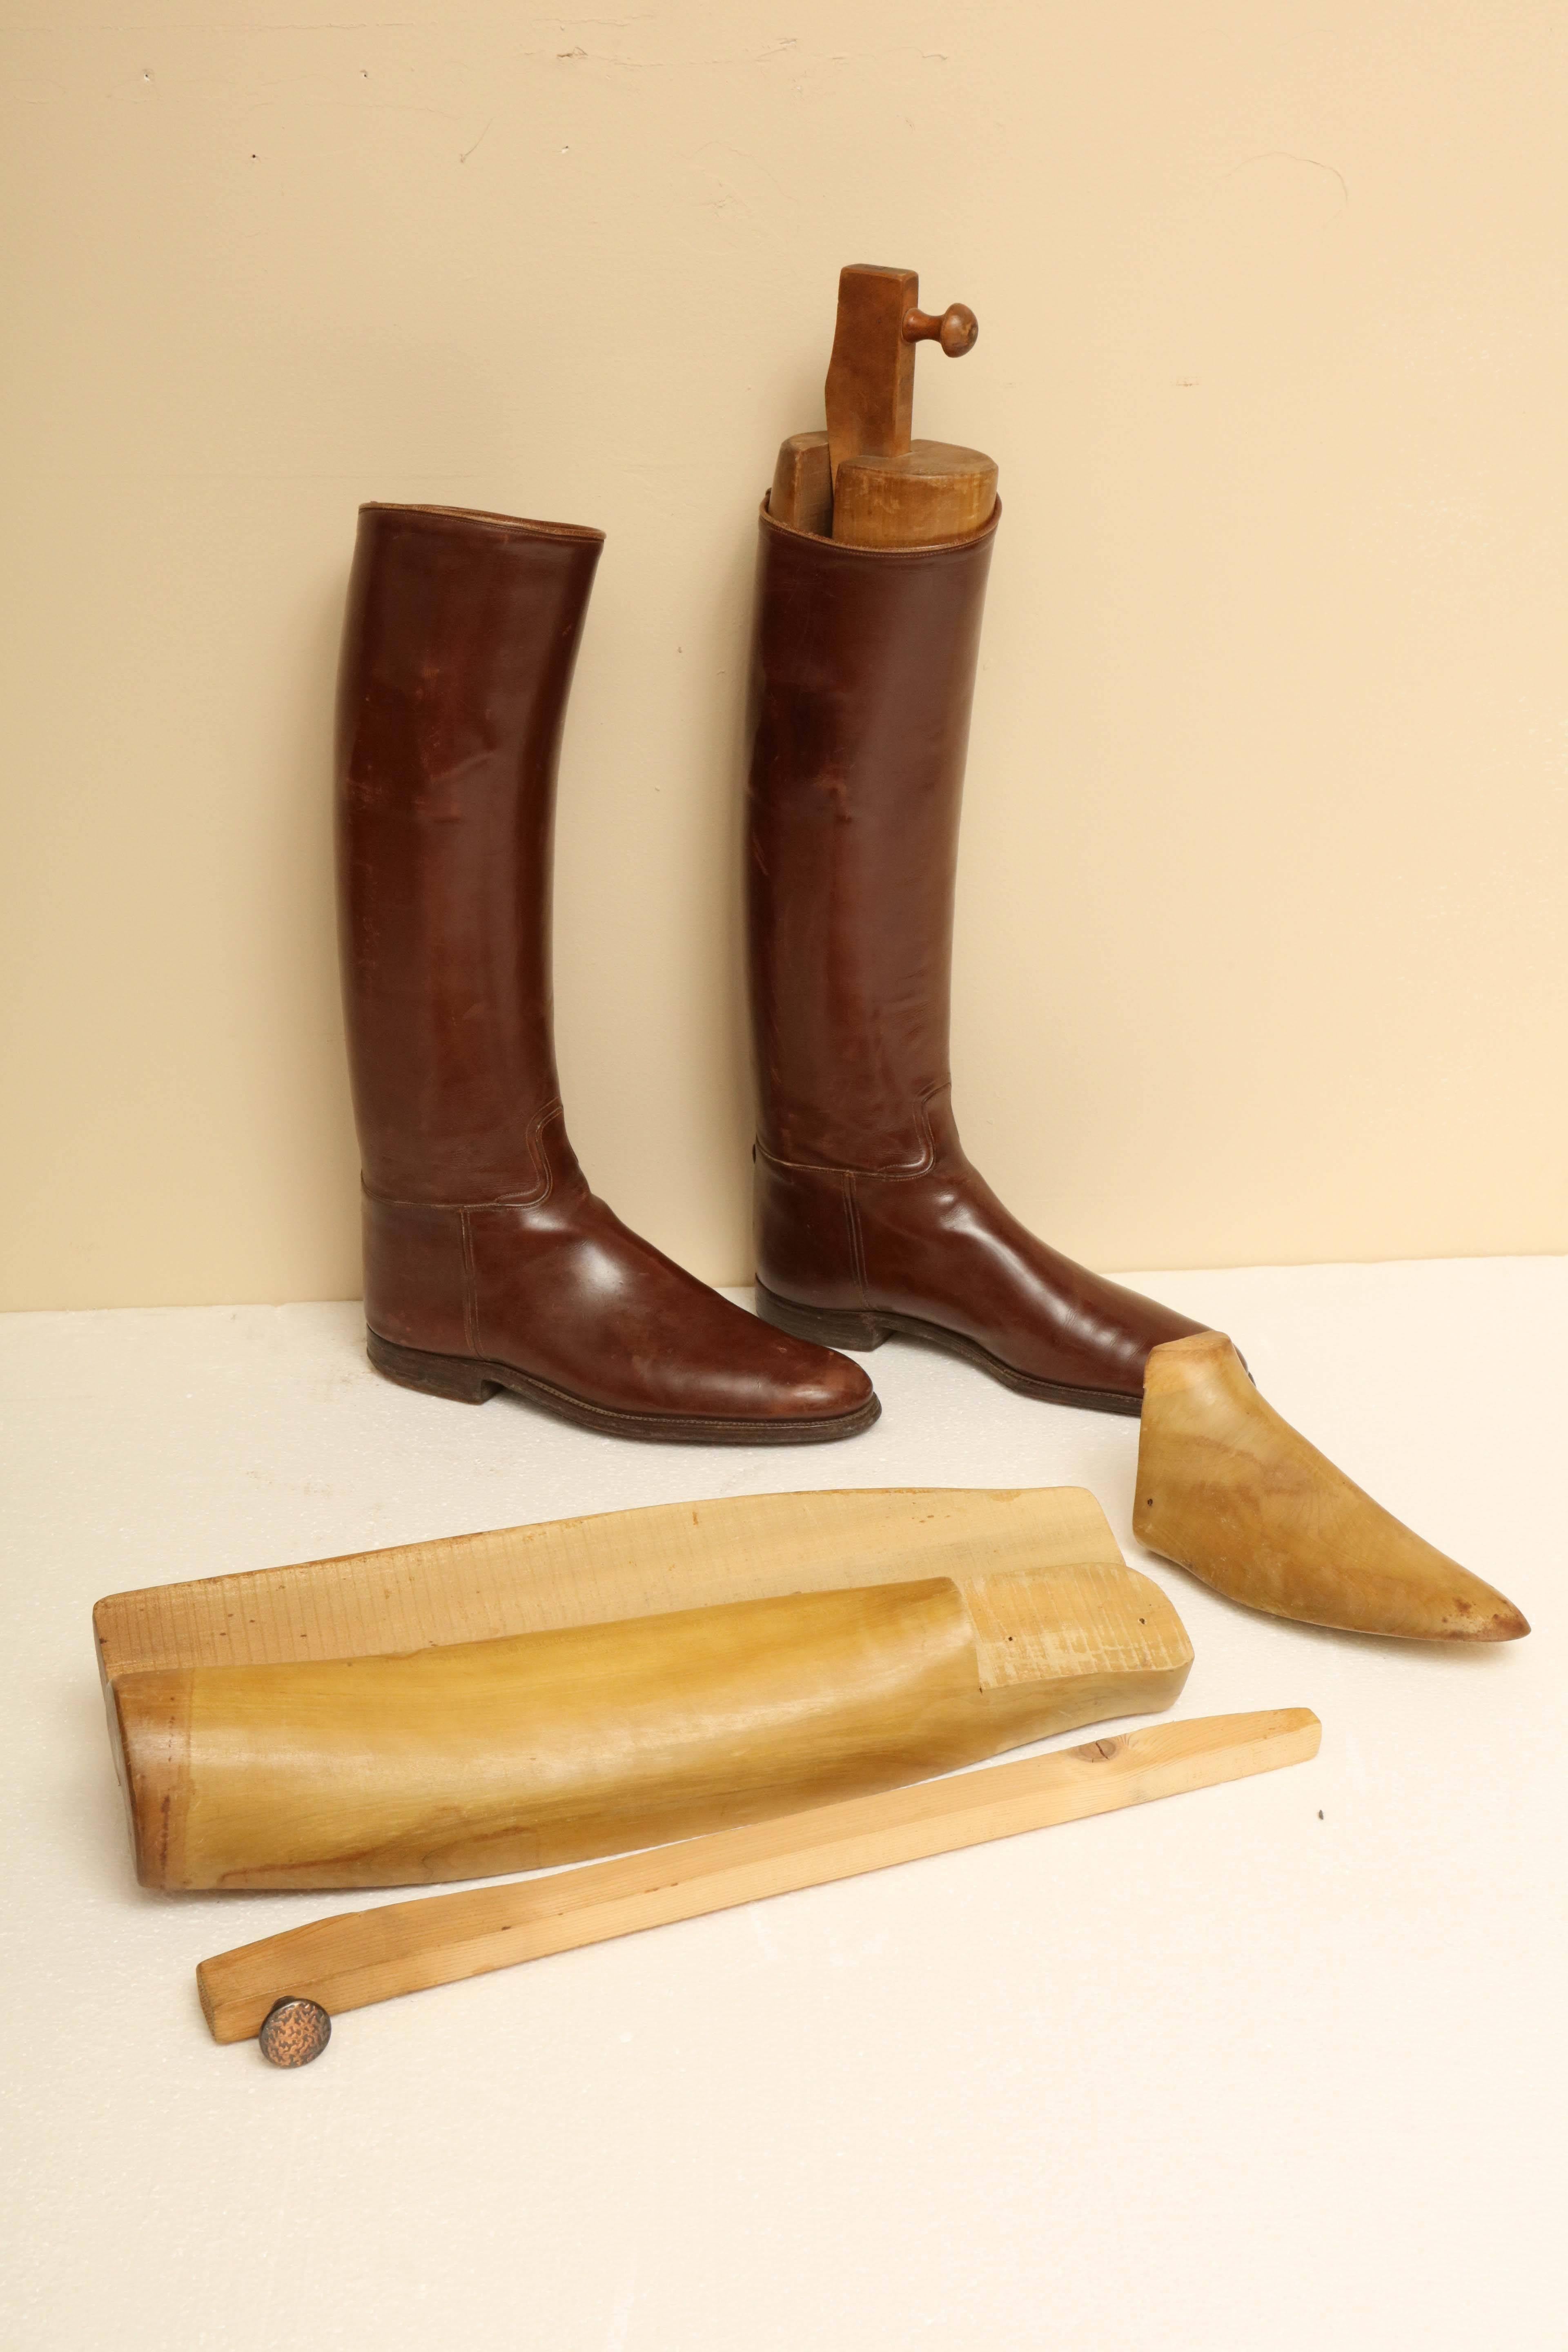 Pair of English Riding Boots with Custom Boot Trees 3